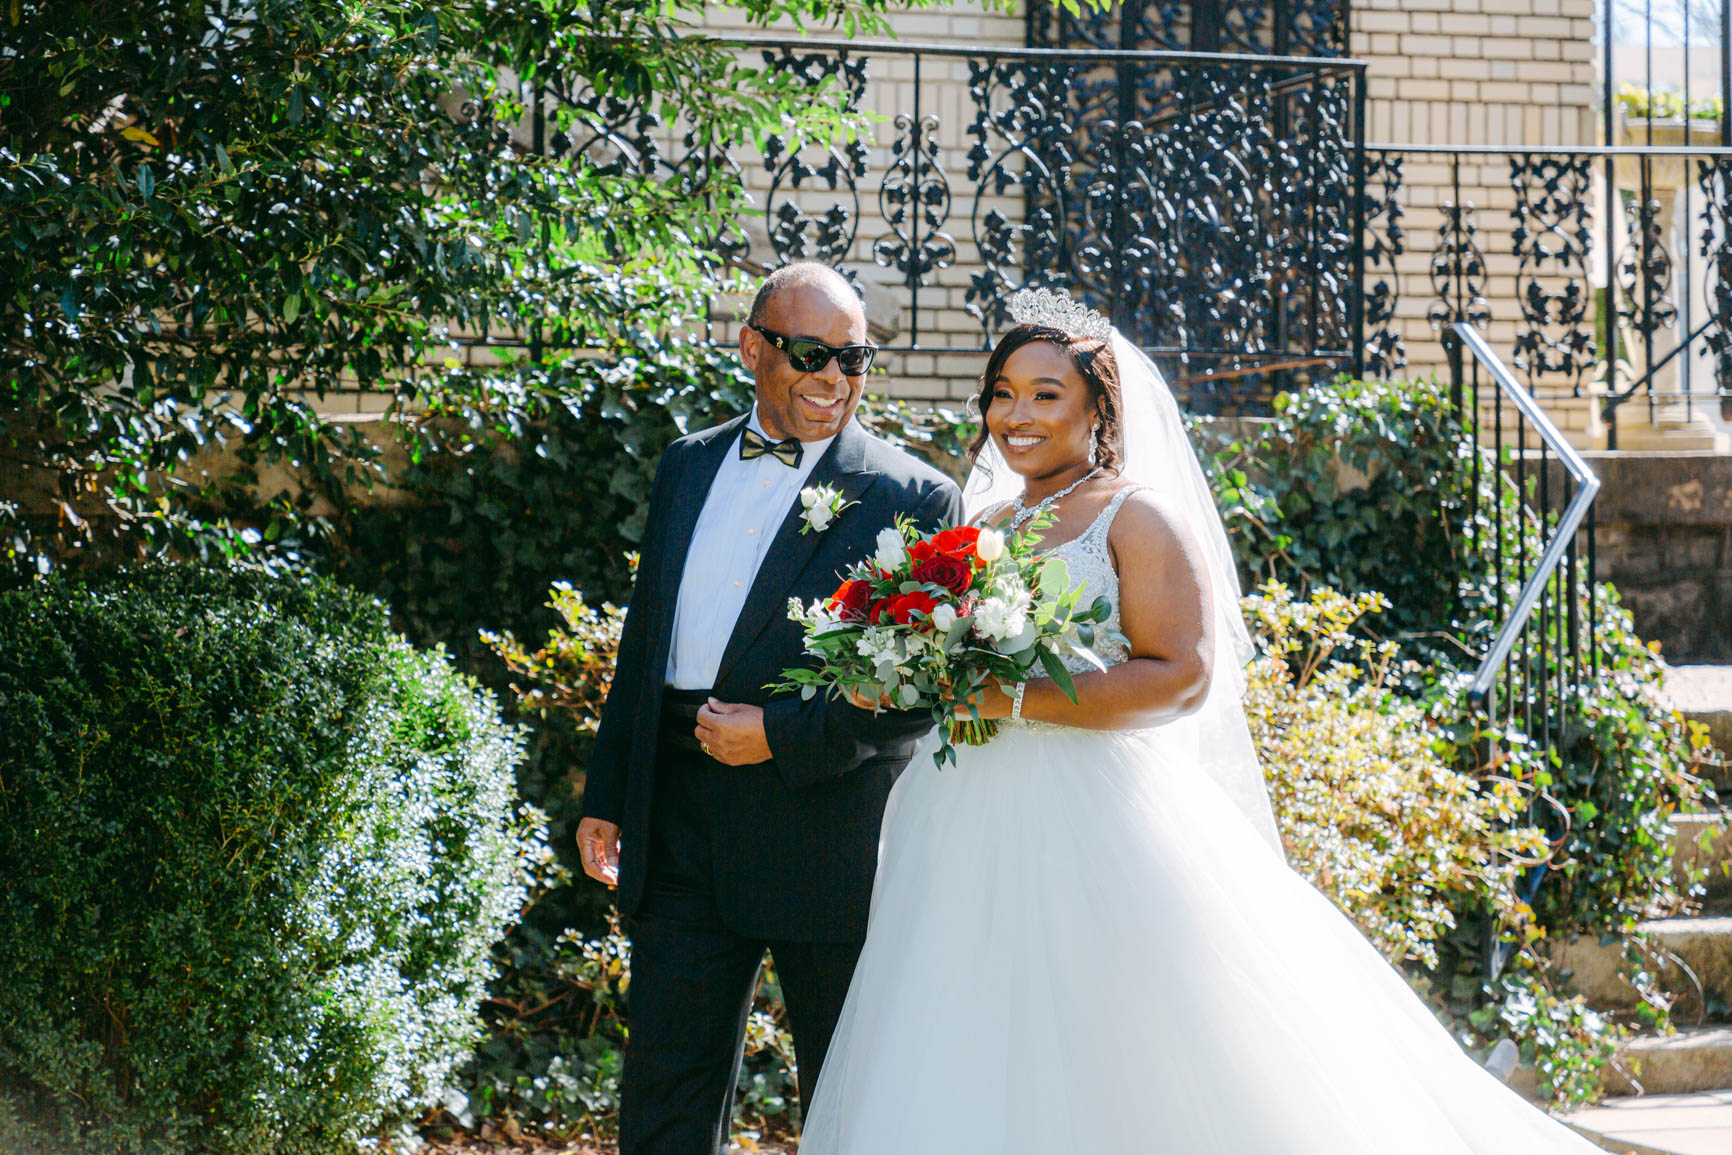 father walking bride down the aisle at Separk Mansion in Gastonia NC shot by Nhieu Tang Photography | nhieutang.com